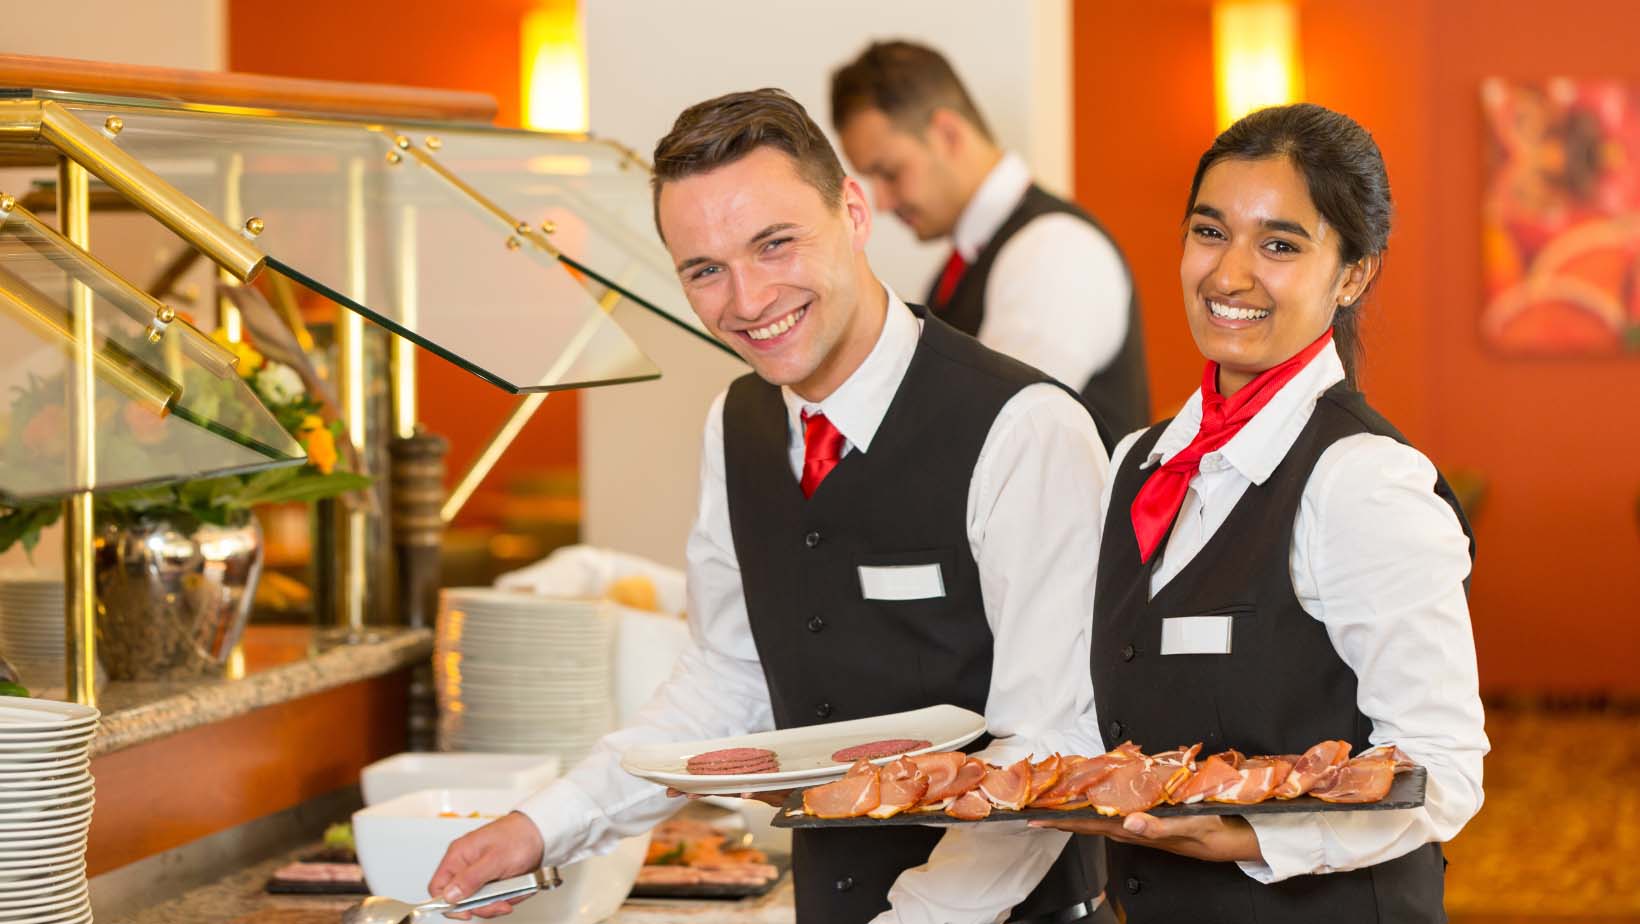 Image: ‘Tis the Season to Appreciate Hard Work: Recognizing the Unsung Heroes of Hospitality with Hotel Employee Travel Benefits